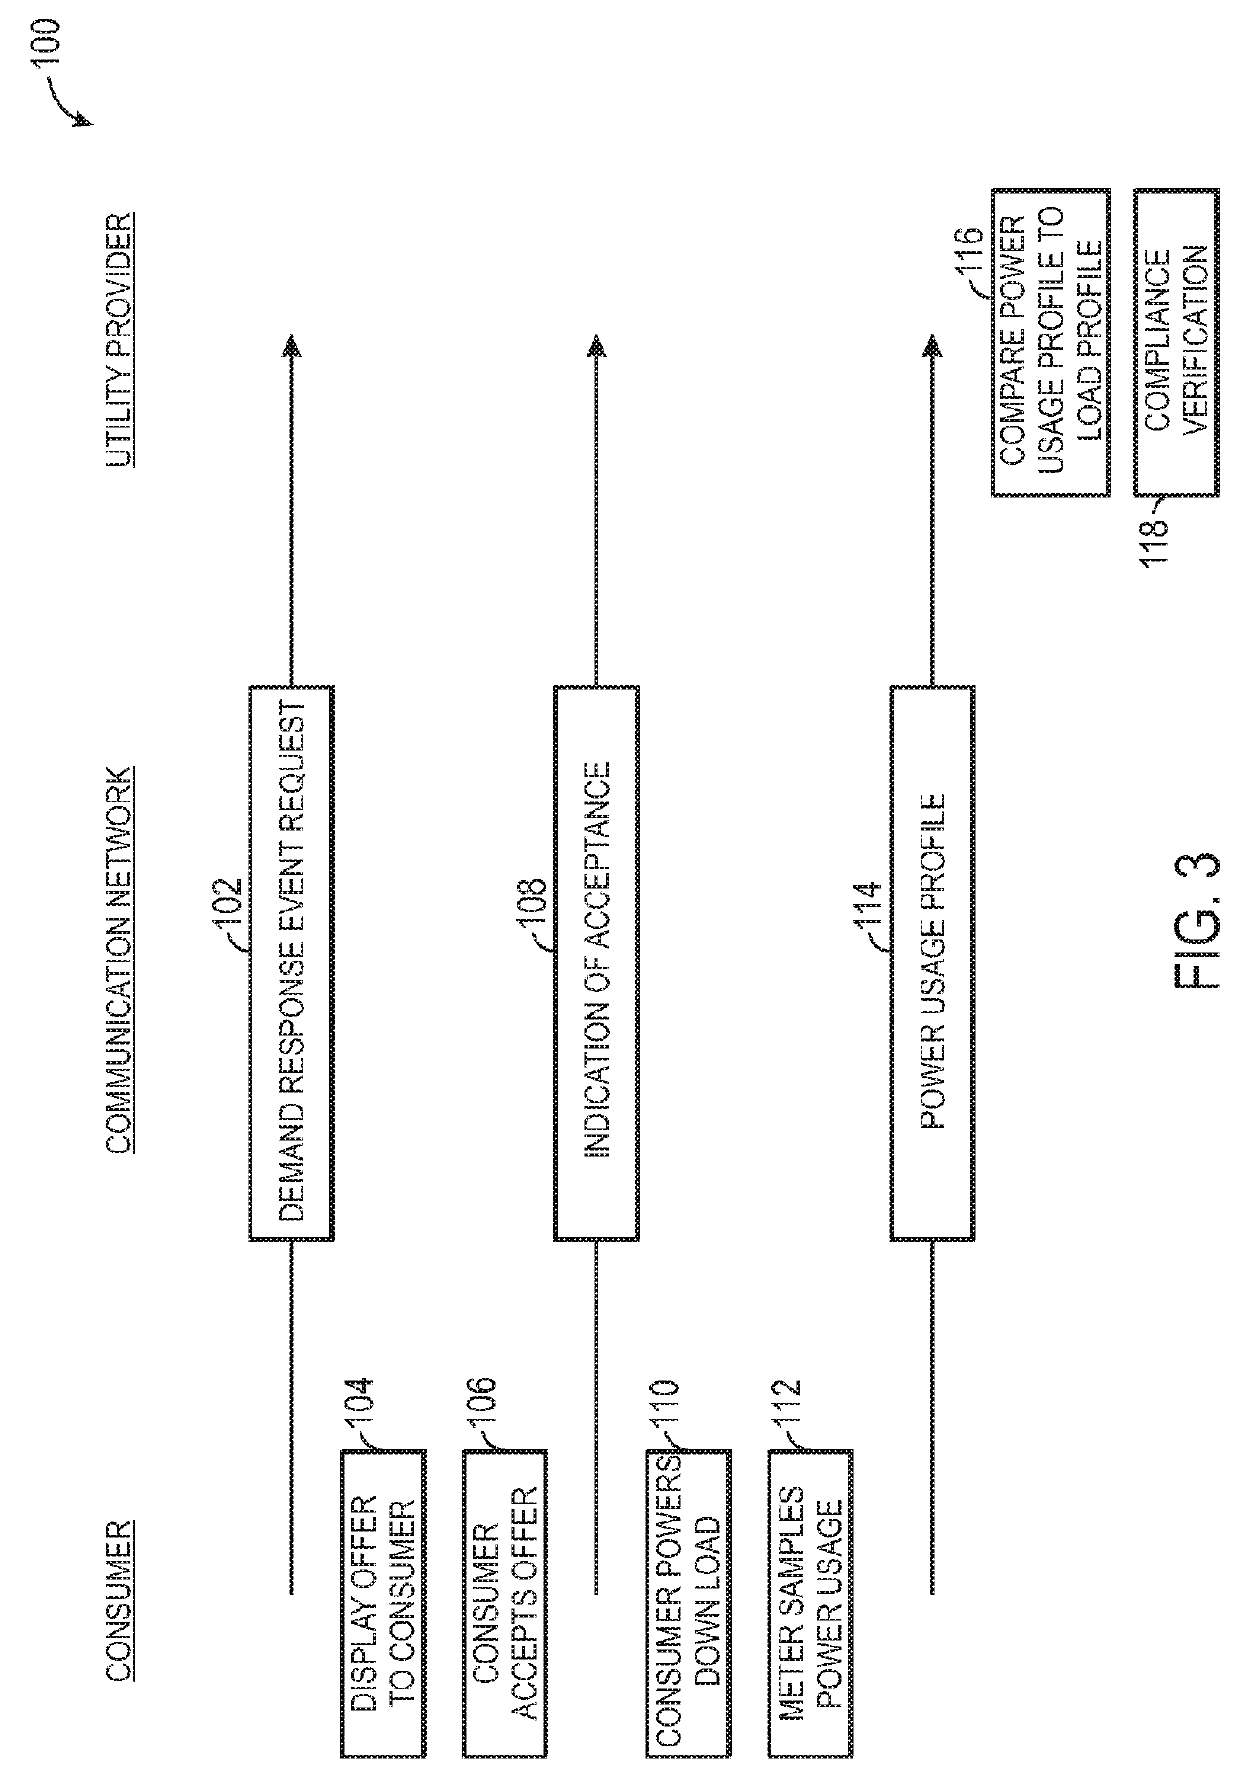 Power consumption compliance monitoring system and method